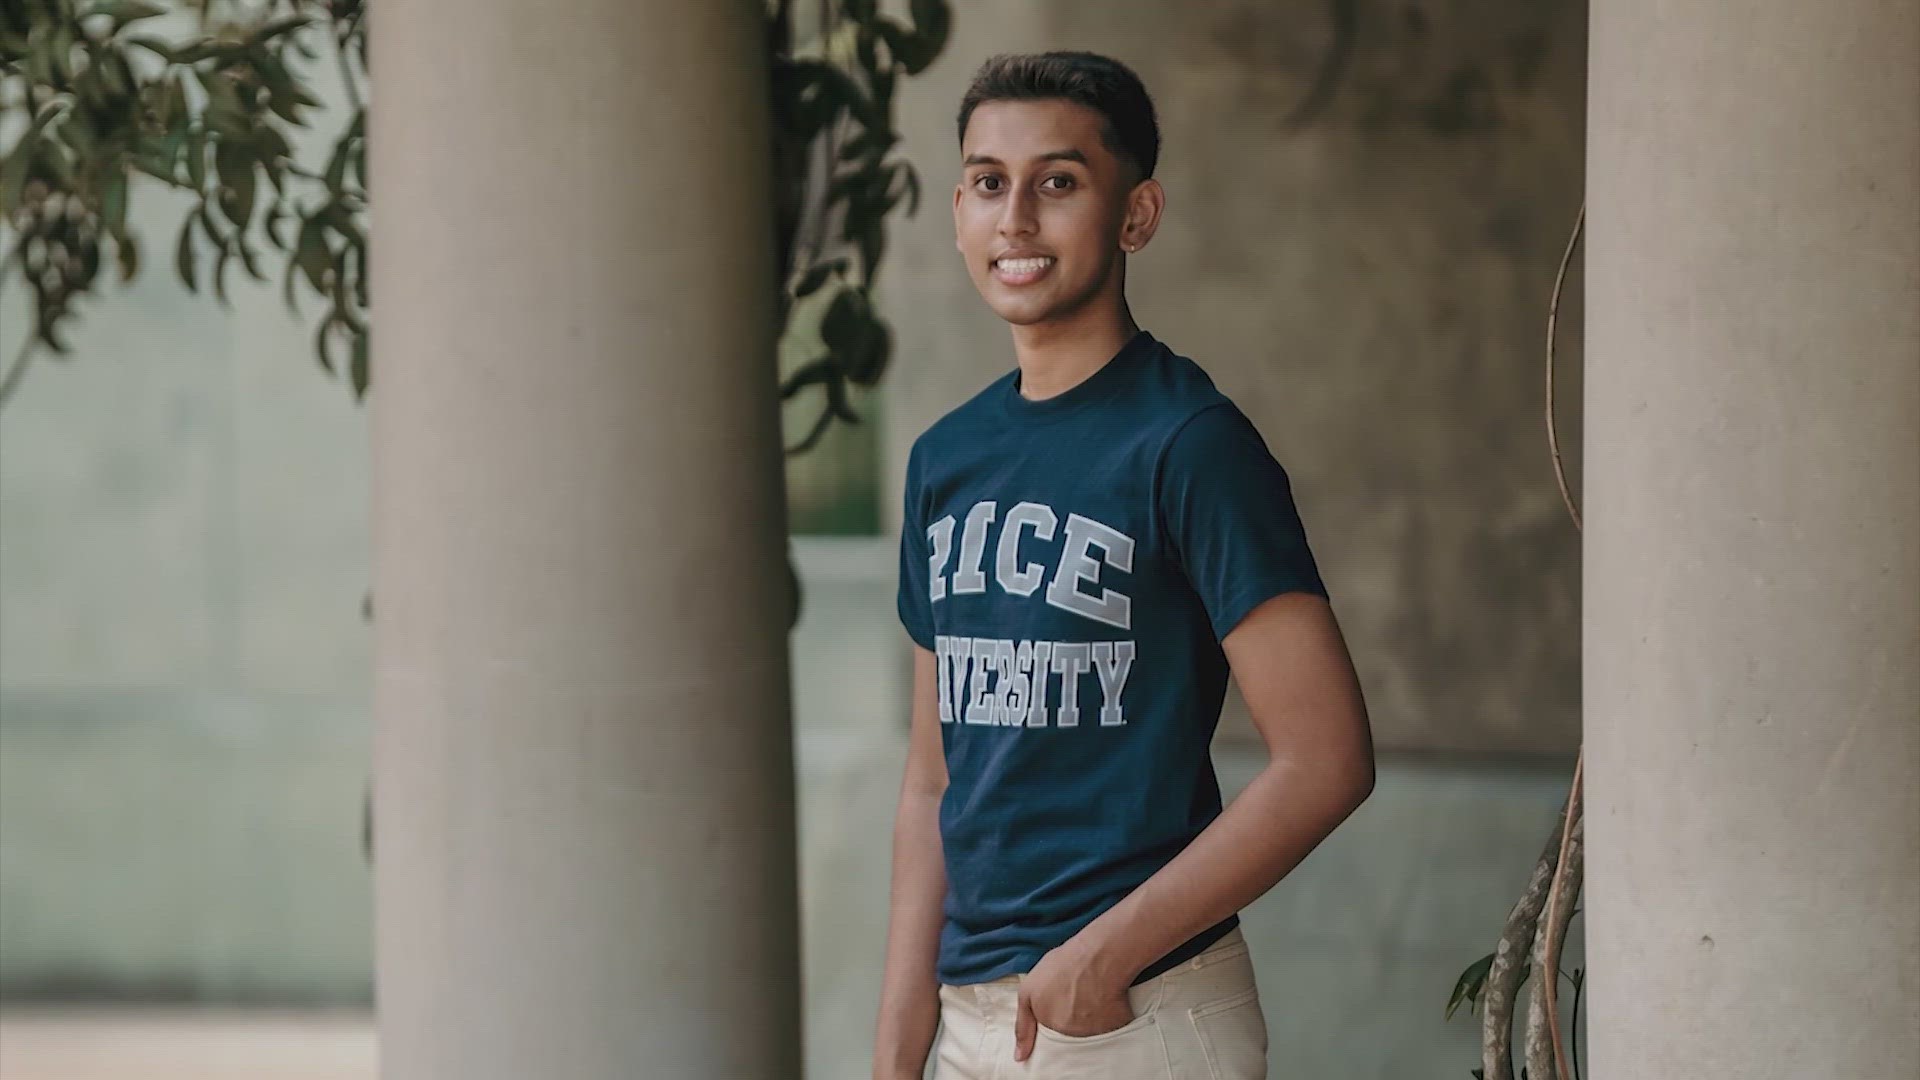 A Rice University student has overcome many obstacles, including a battle with cancer. Because of that, Rehan Siddiqui wants to be an oncologist after college.